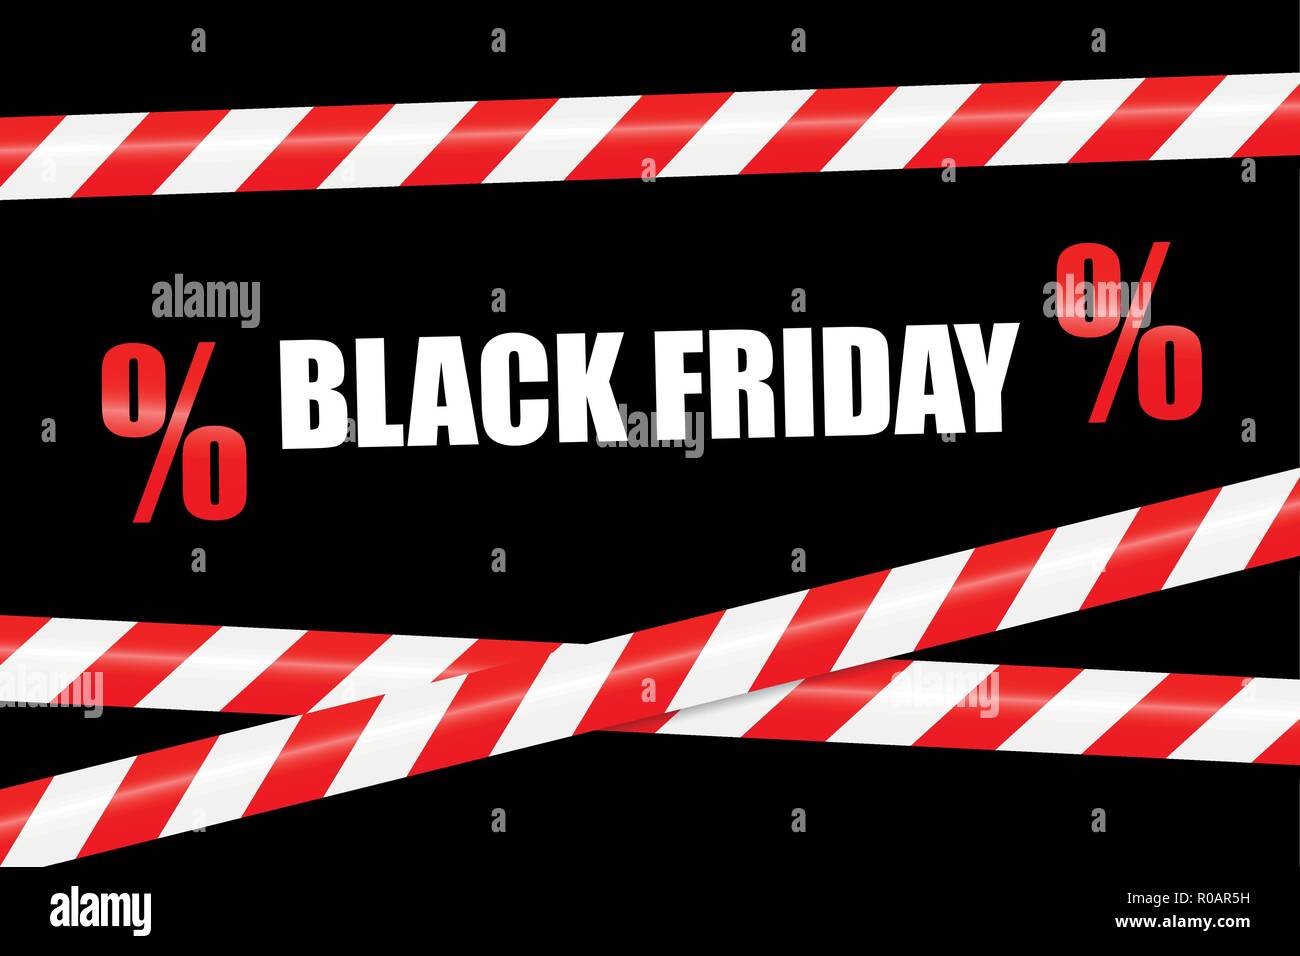 black friday promotion with red and white warning tape vector illustration EPS10 Stock Vector